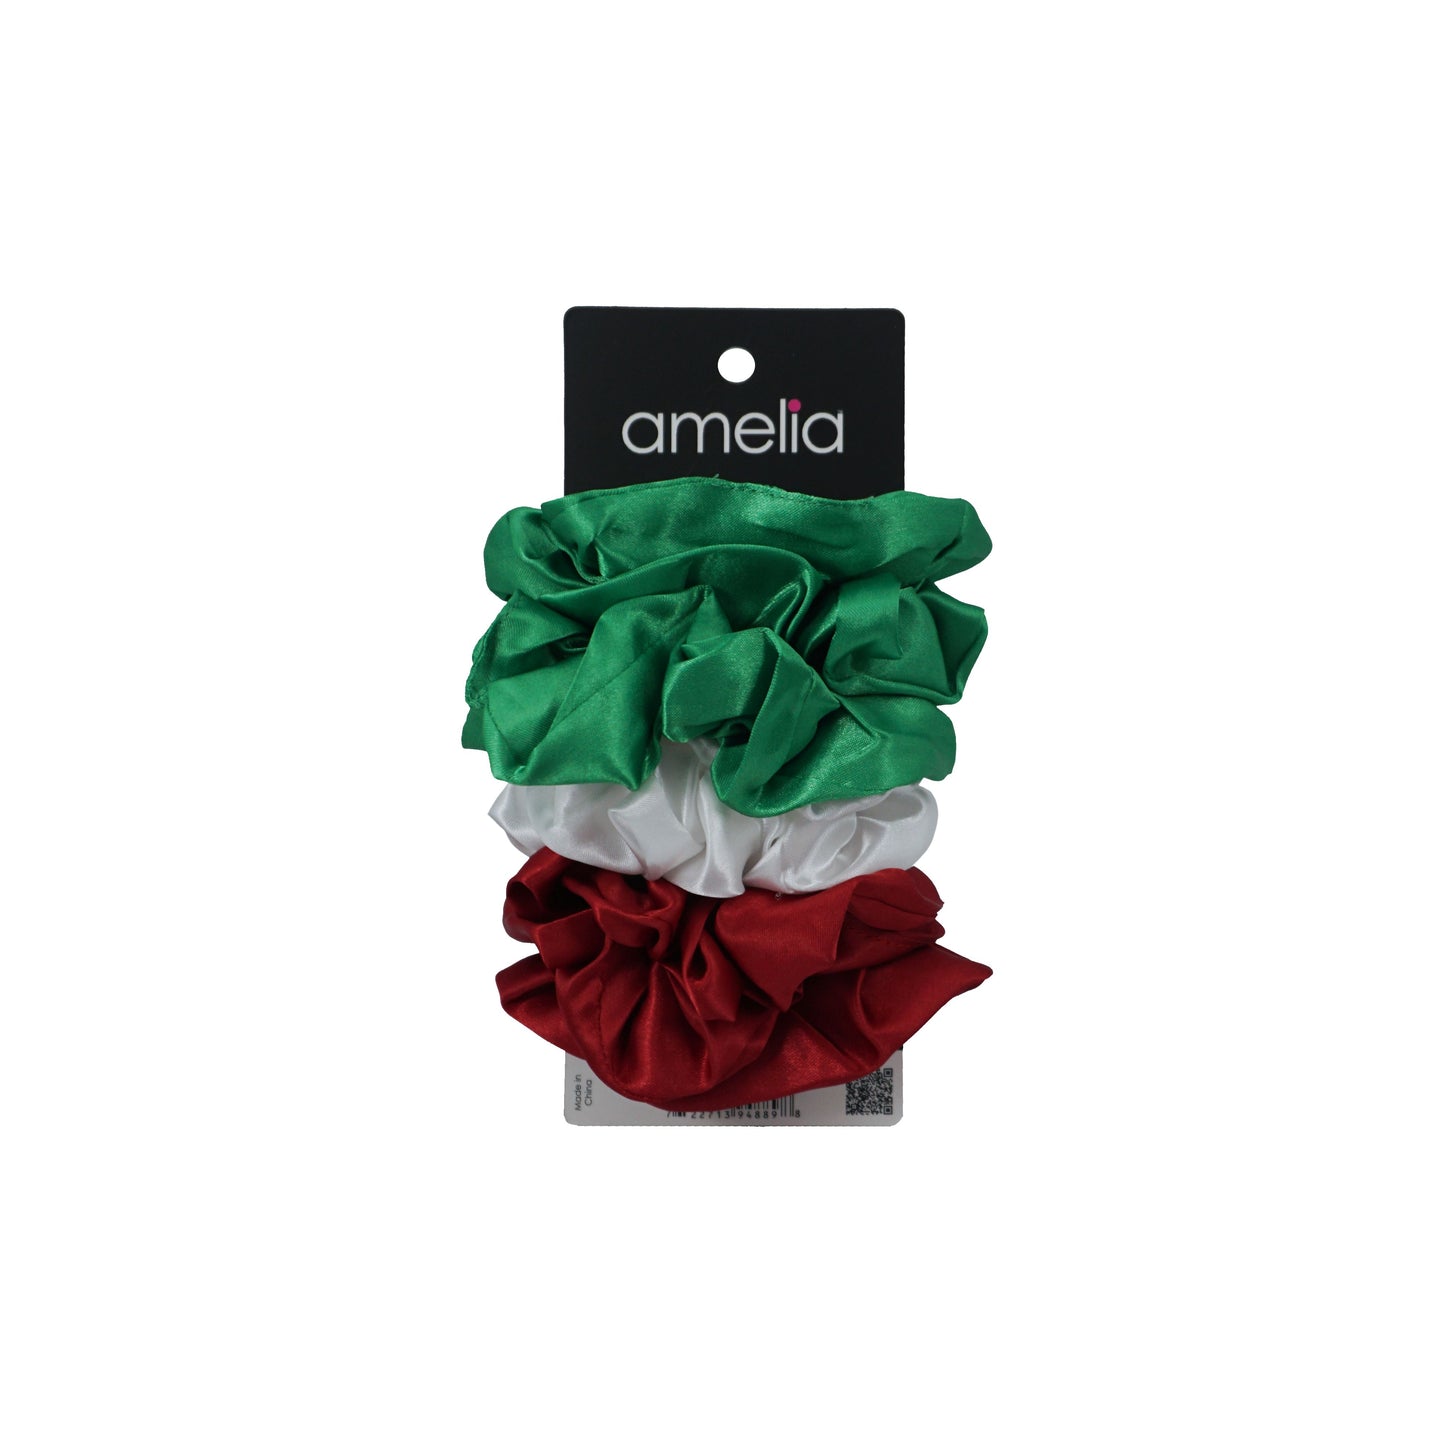 Amelia Beauty Products, Red, White and Green Satin Scrunchies, 3.5in Diameter, Gentle on Hair, Strong Hold, No Snag, No Dents or Creases. 8 Pack